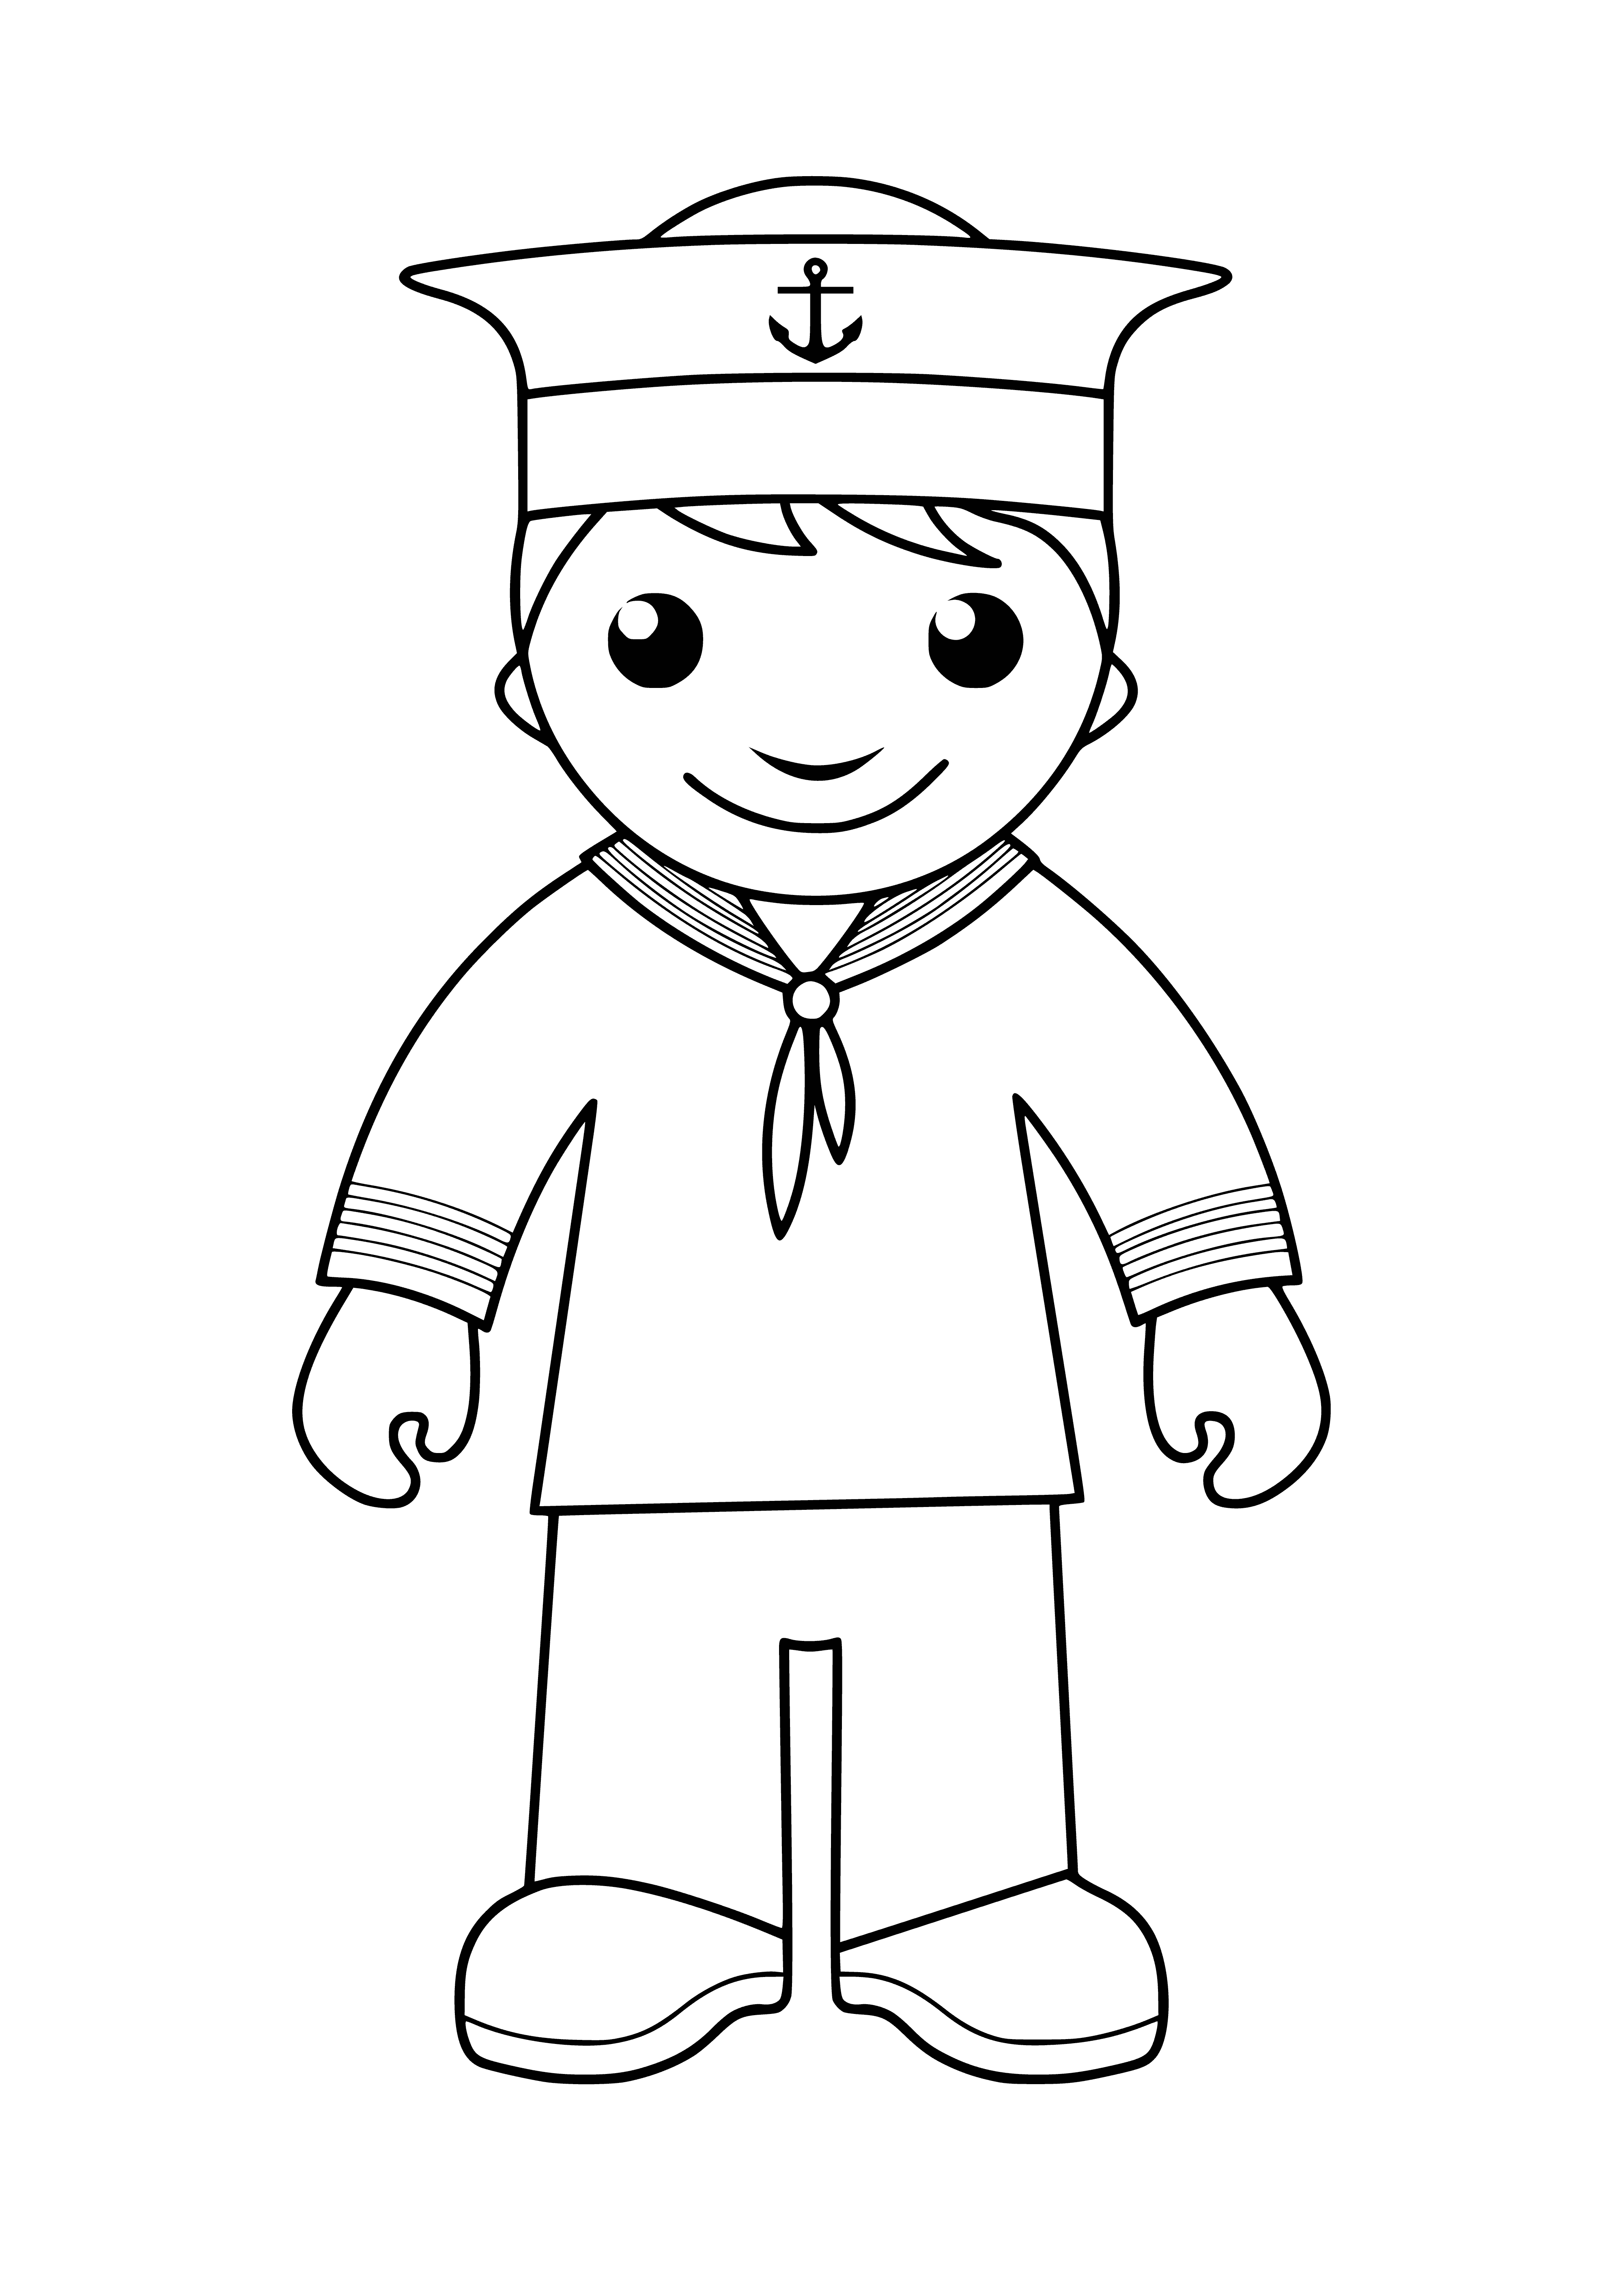 Sailor coloring page